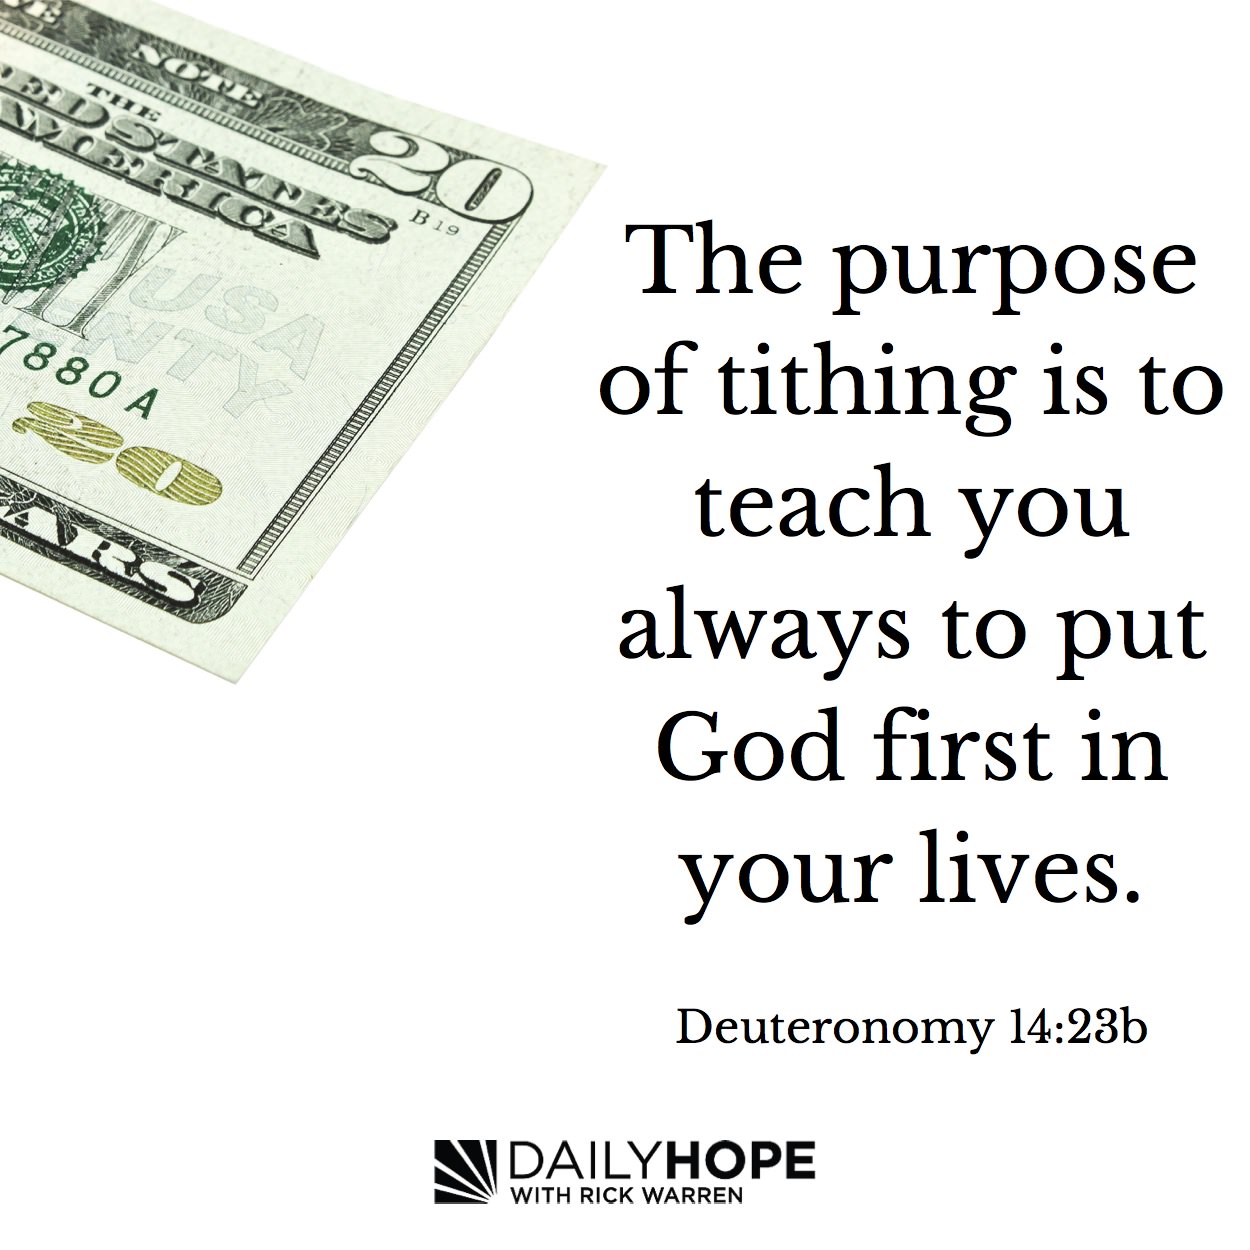 The Promise, Purpose, Place, and Day for Tithing